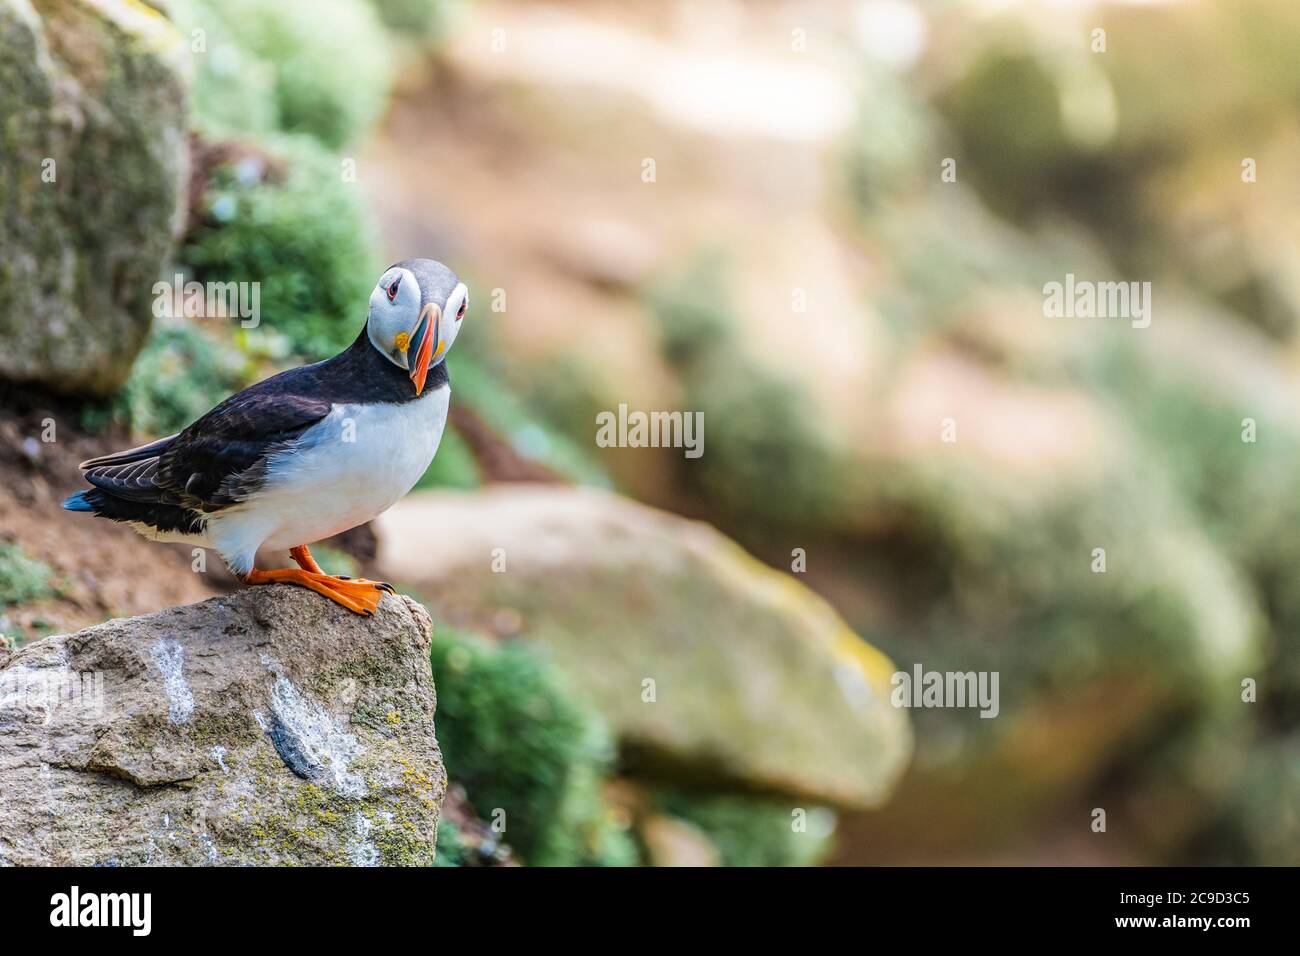 Atlantic puffin, Fratercula arctica, resting atop a cliff. Soft background  Great Saltee Island, South of Ireland. Stock Photo